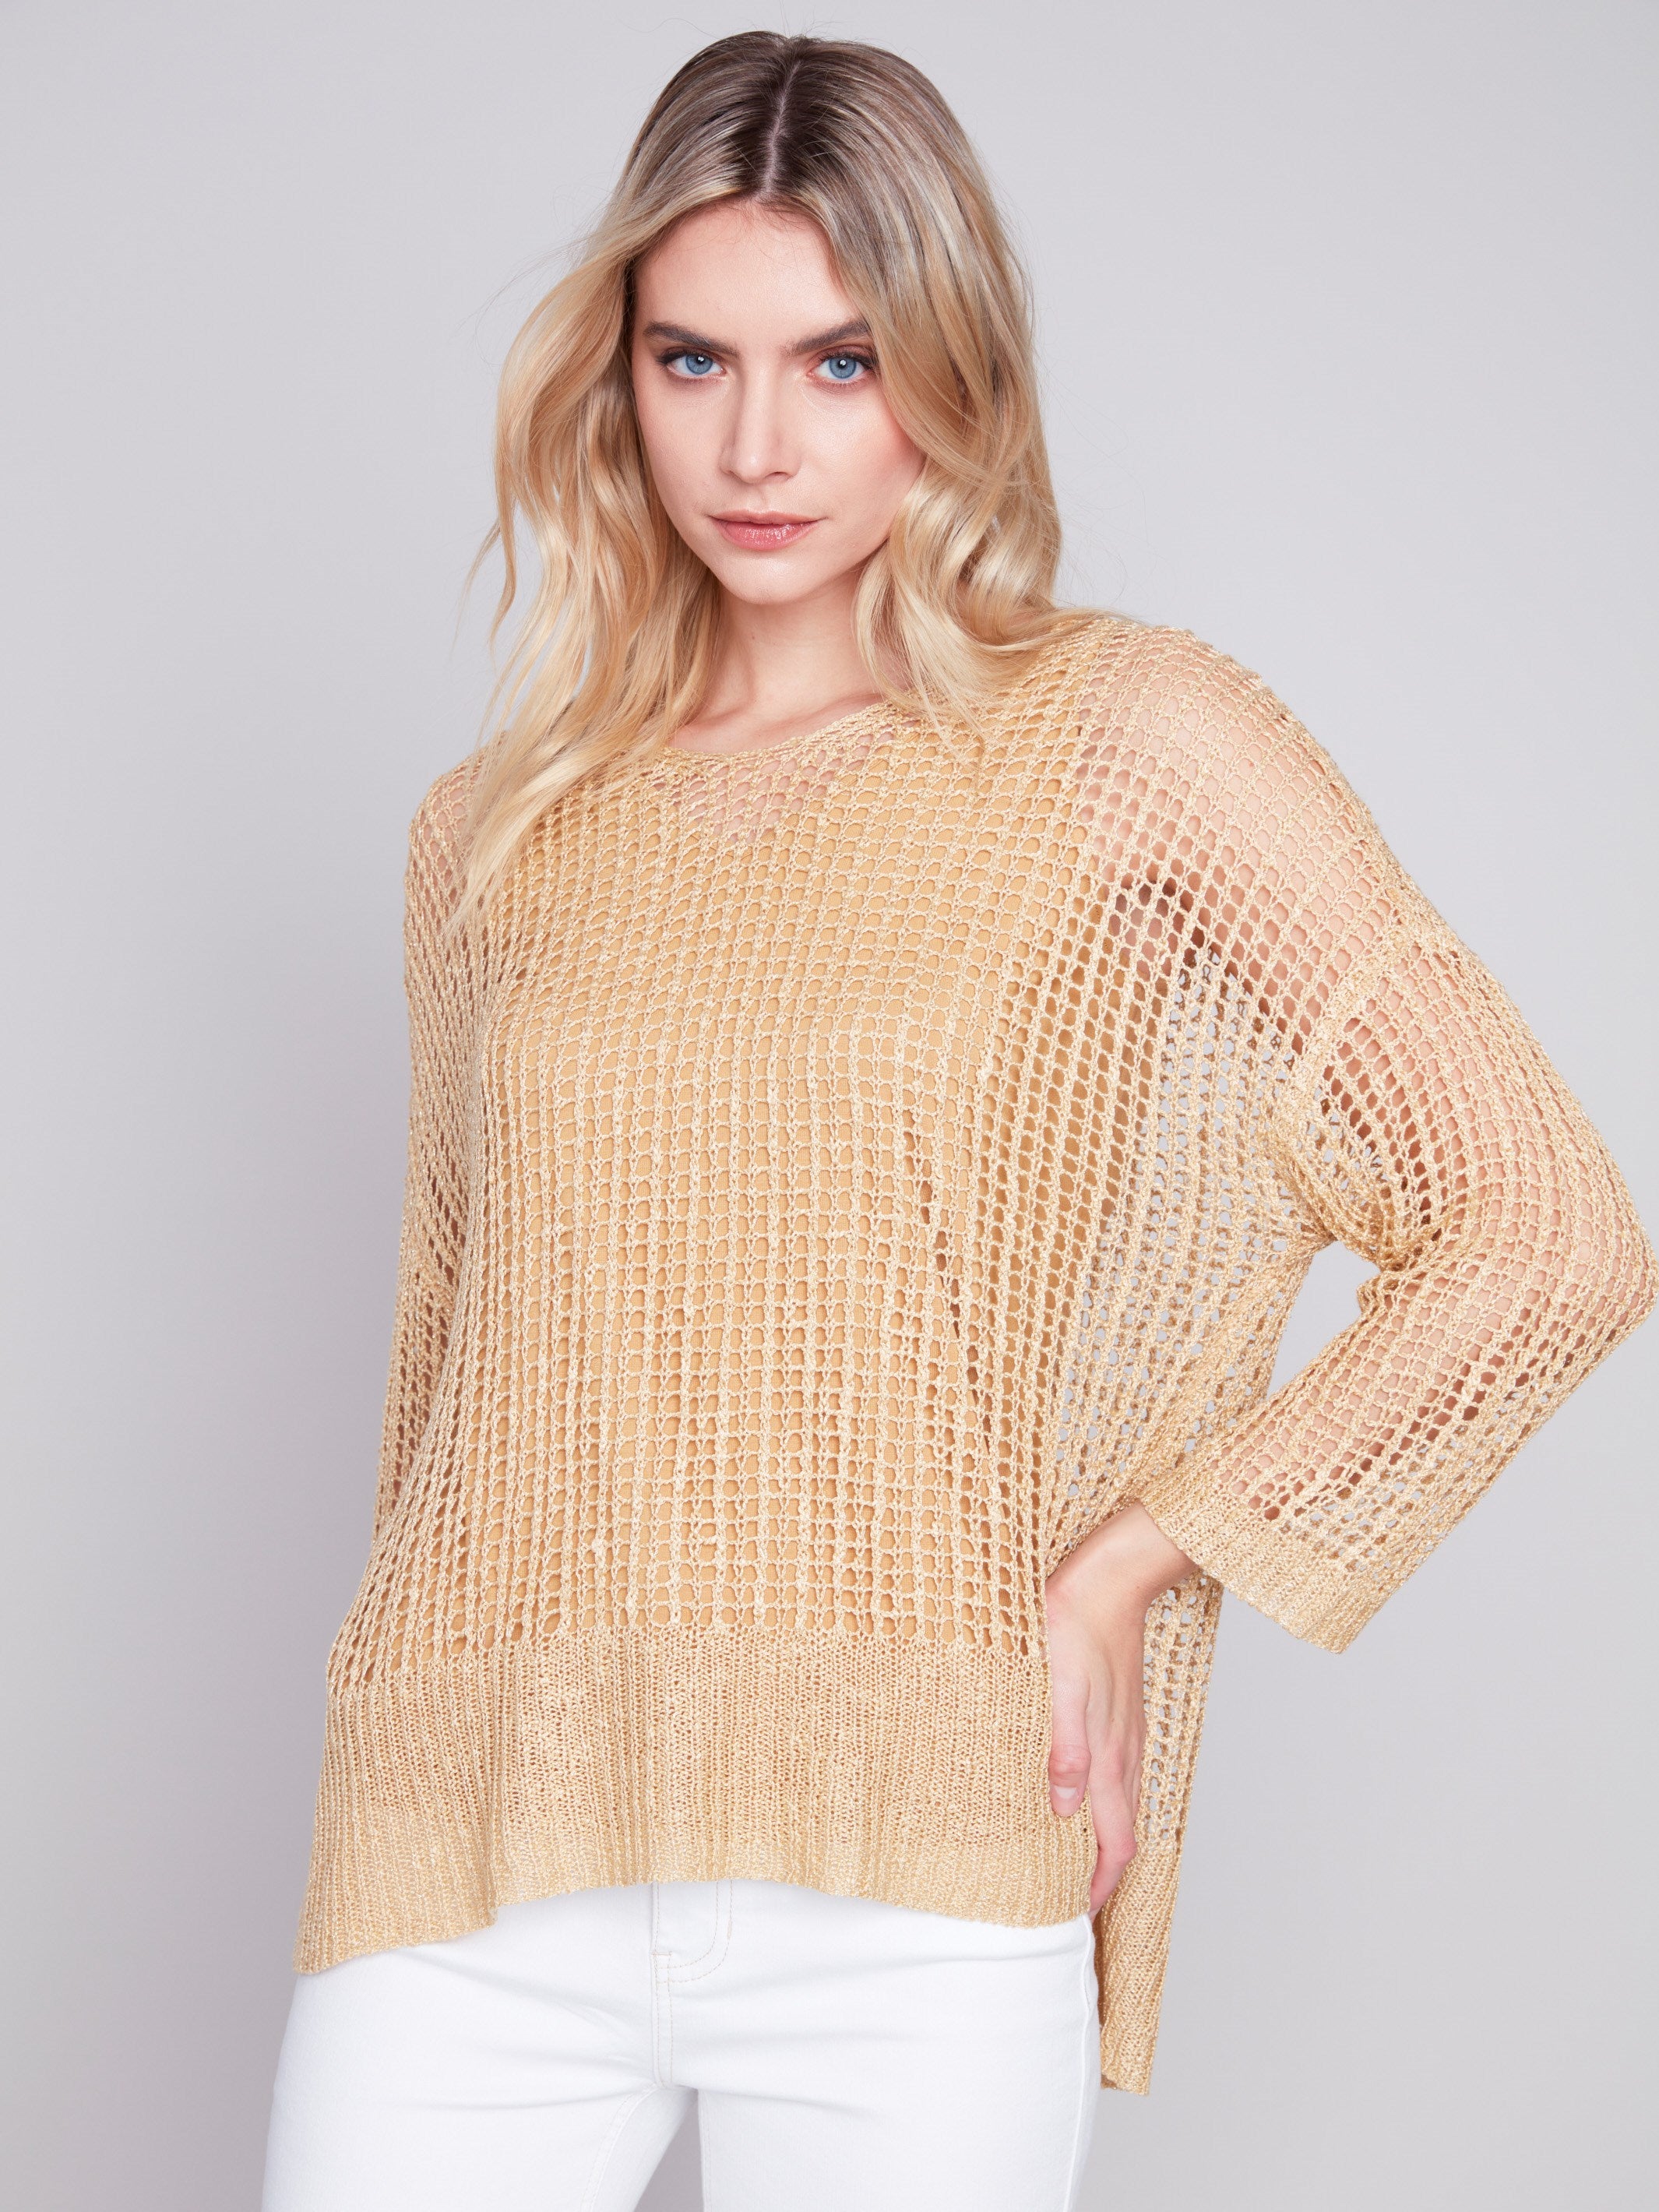 Fishnet Crochet Sweater - Gold - Charlie B Collection Canada - Image 5